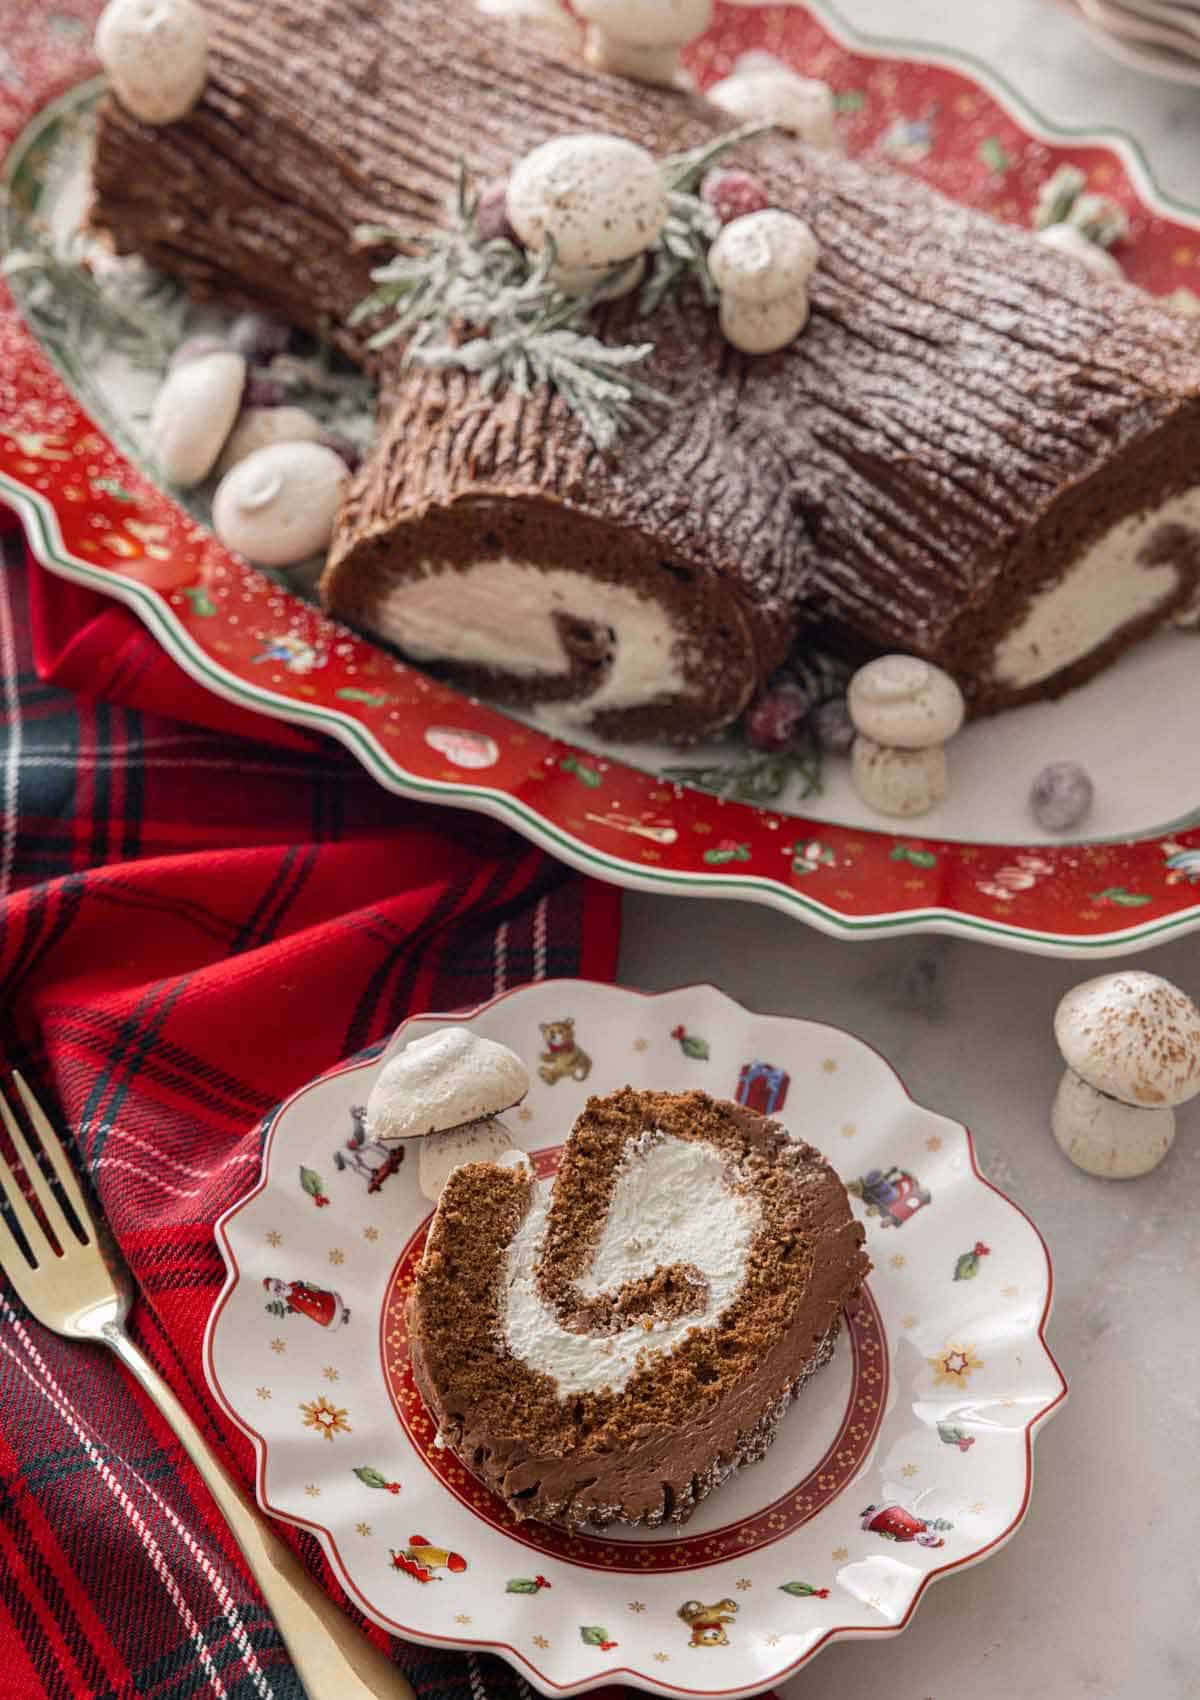 A Yule log on a platter with a slice of the cake on a plate in front of it.